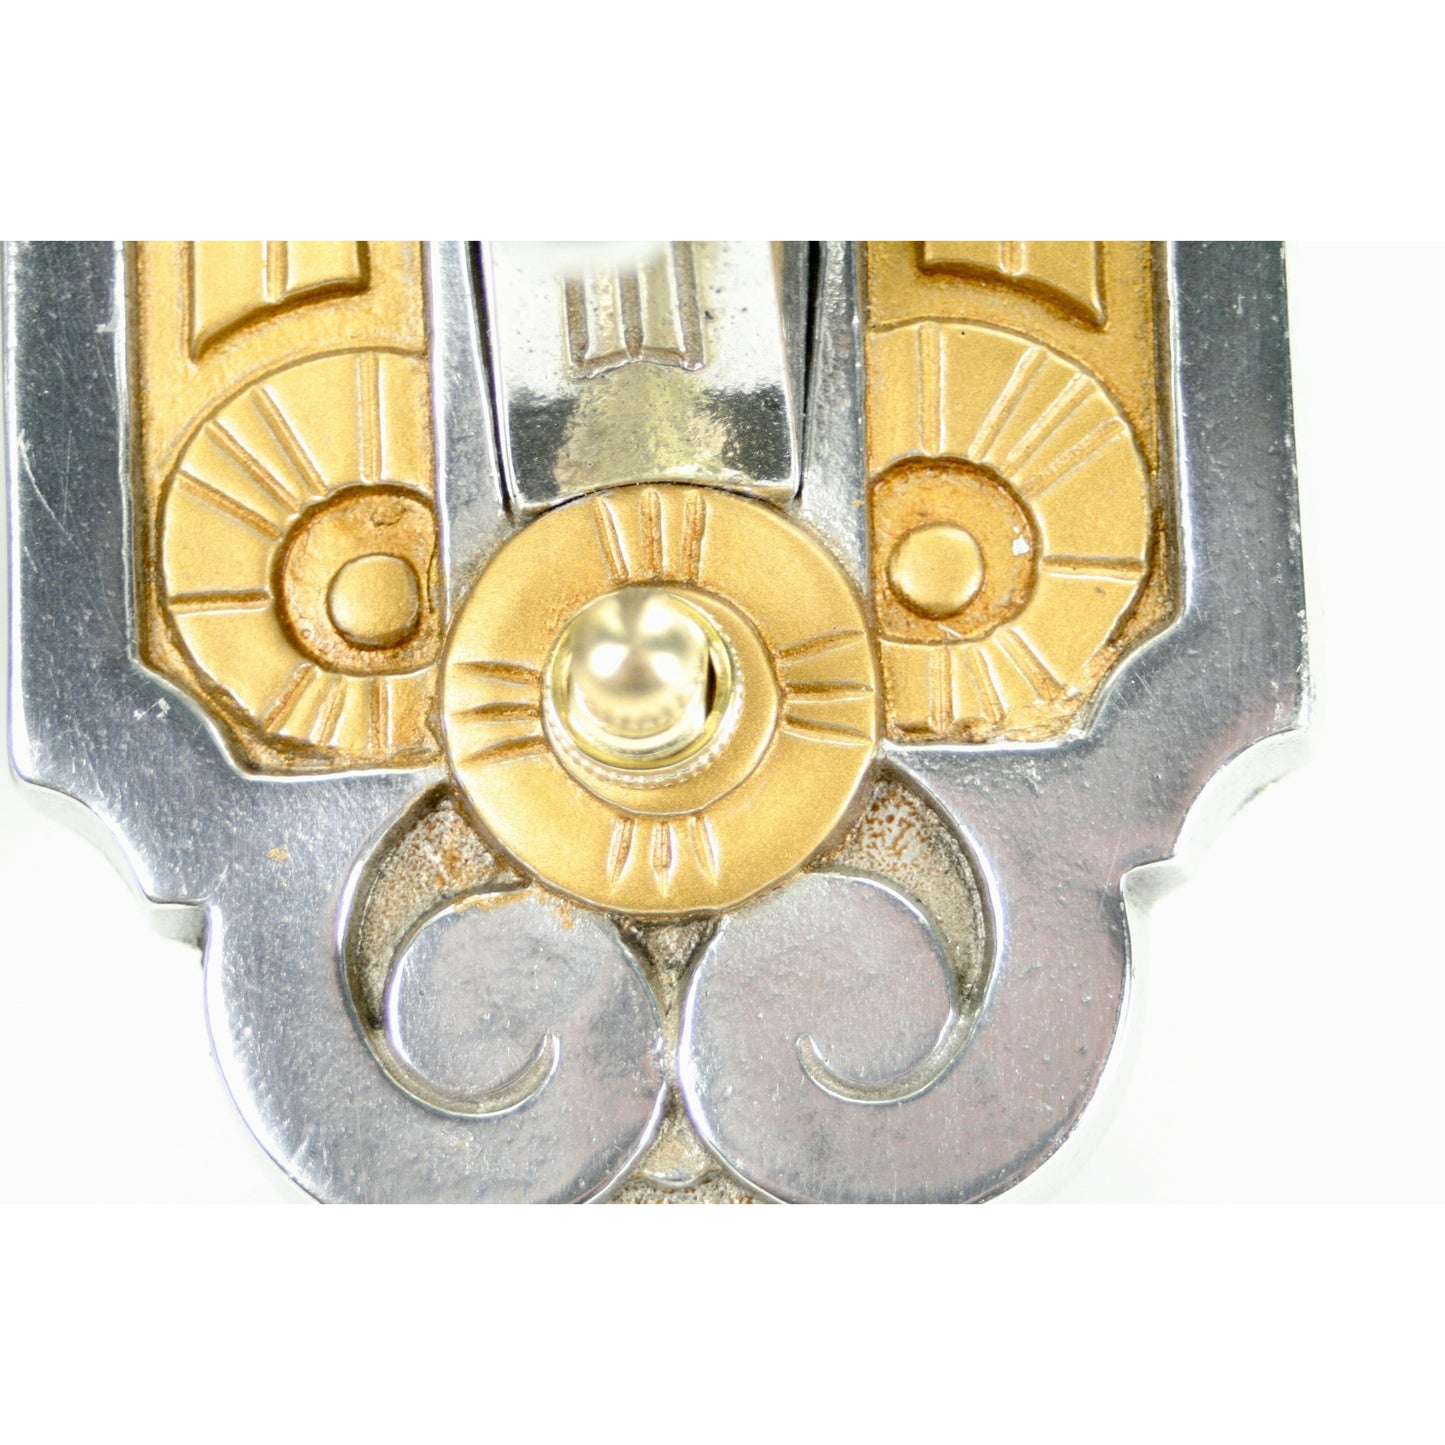 Switch detail on art deco sconce